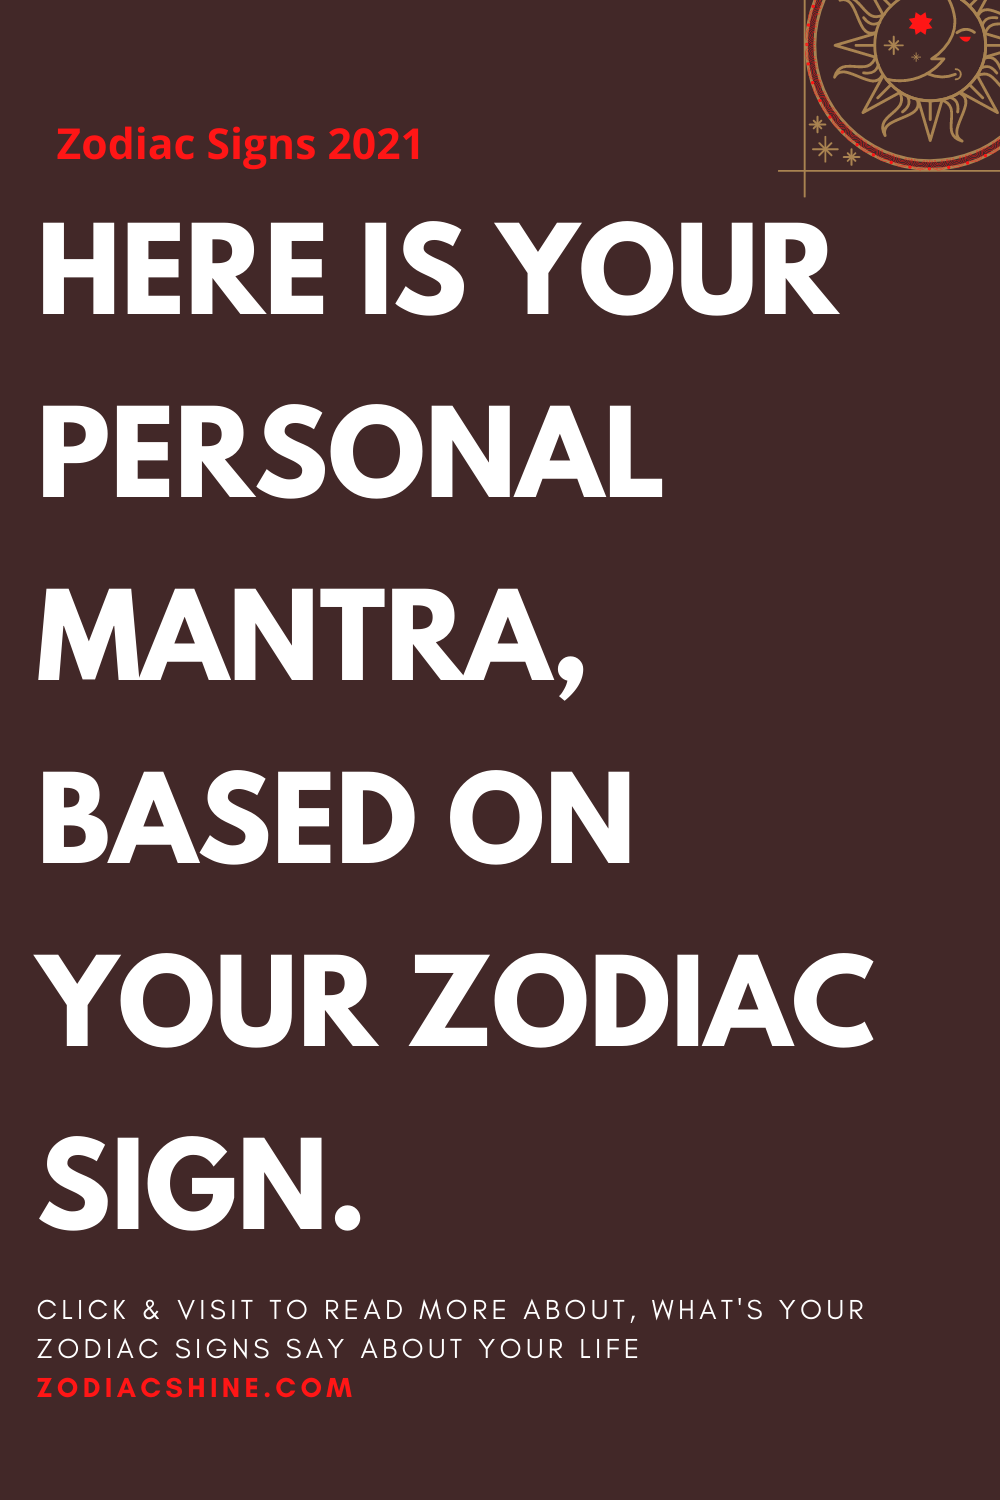 HERE IS YOUR PERSONAL MANTRA, BASED ON YOUR ZODIAC SIGN.